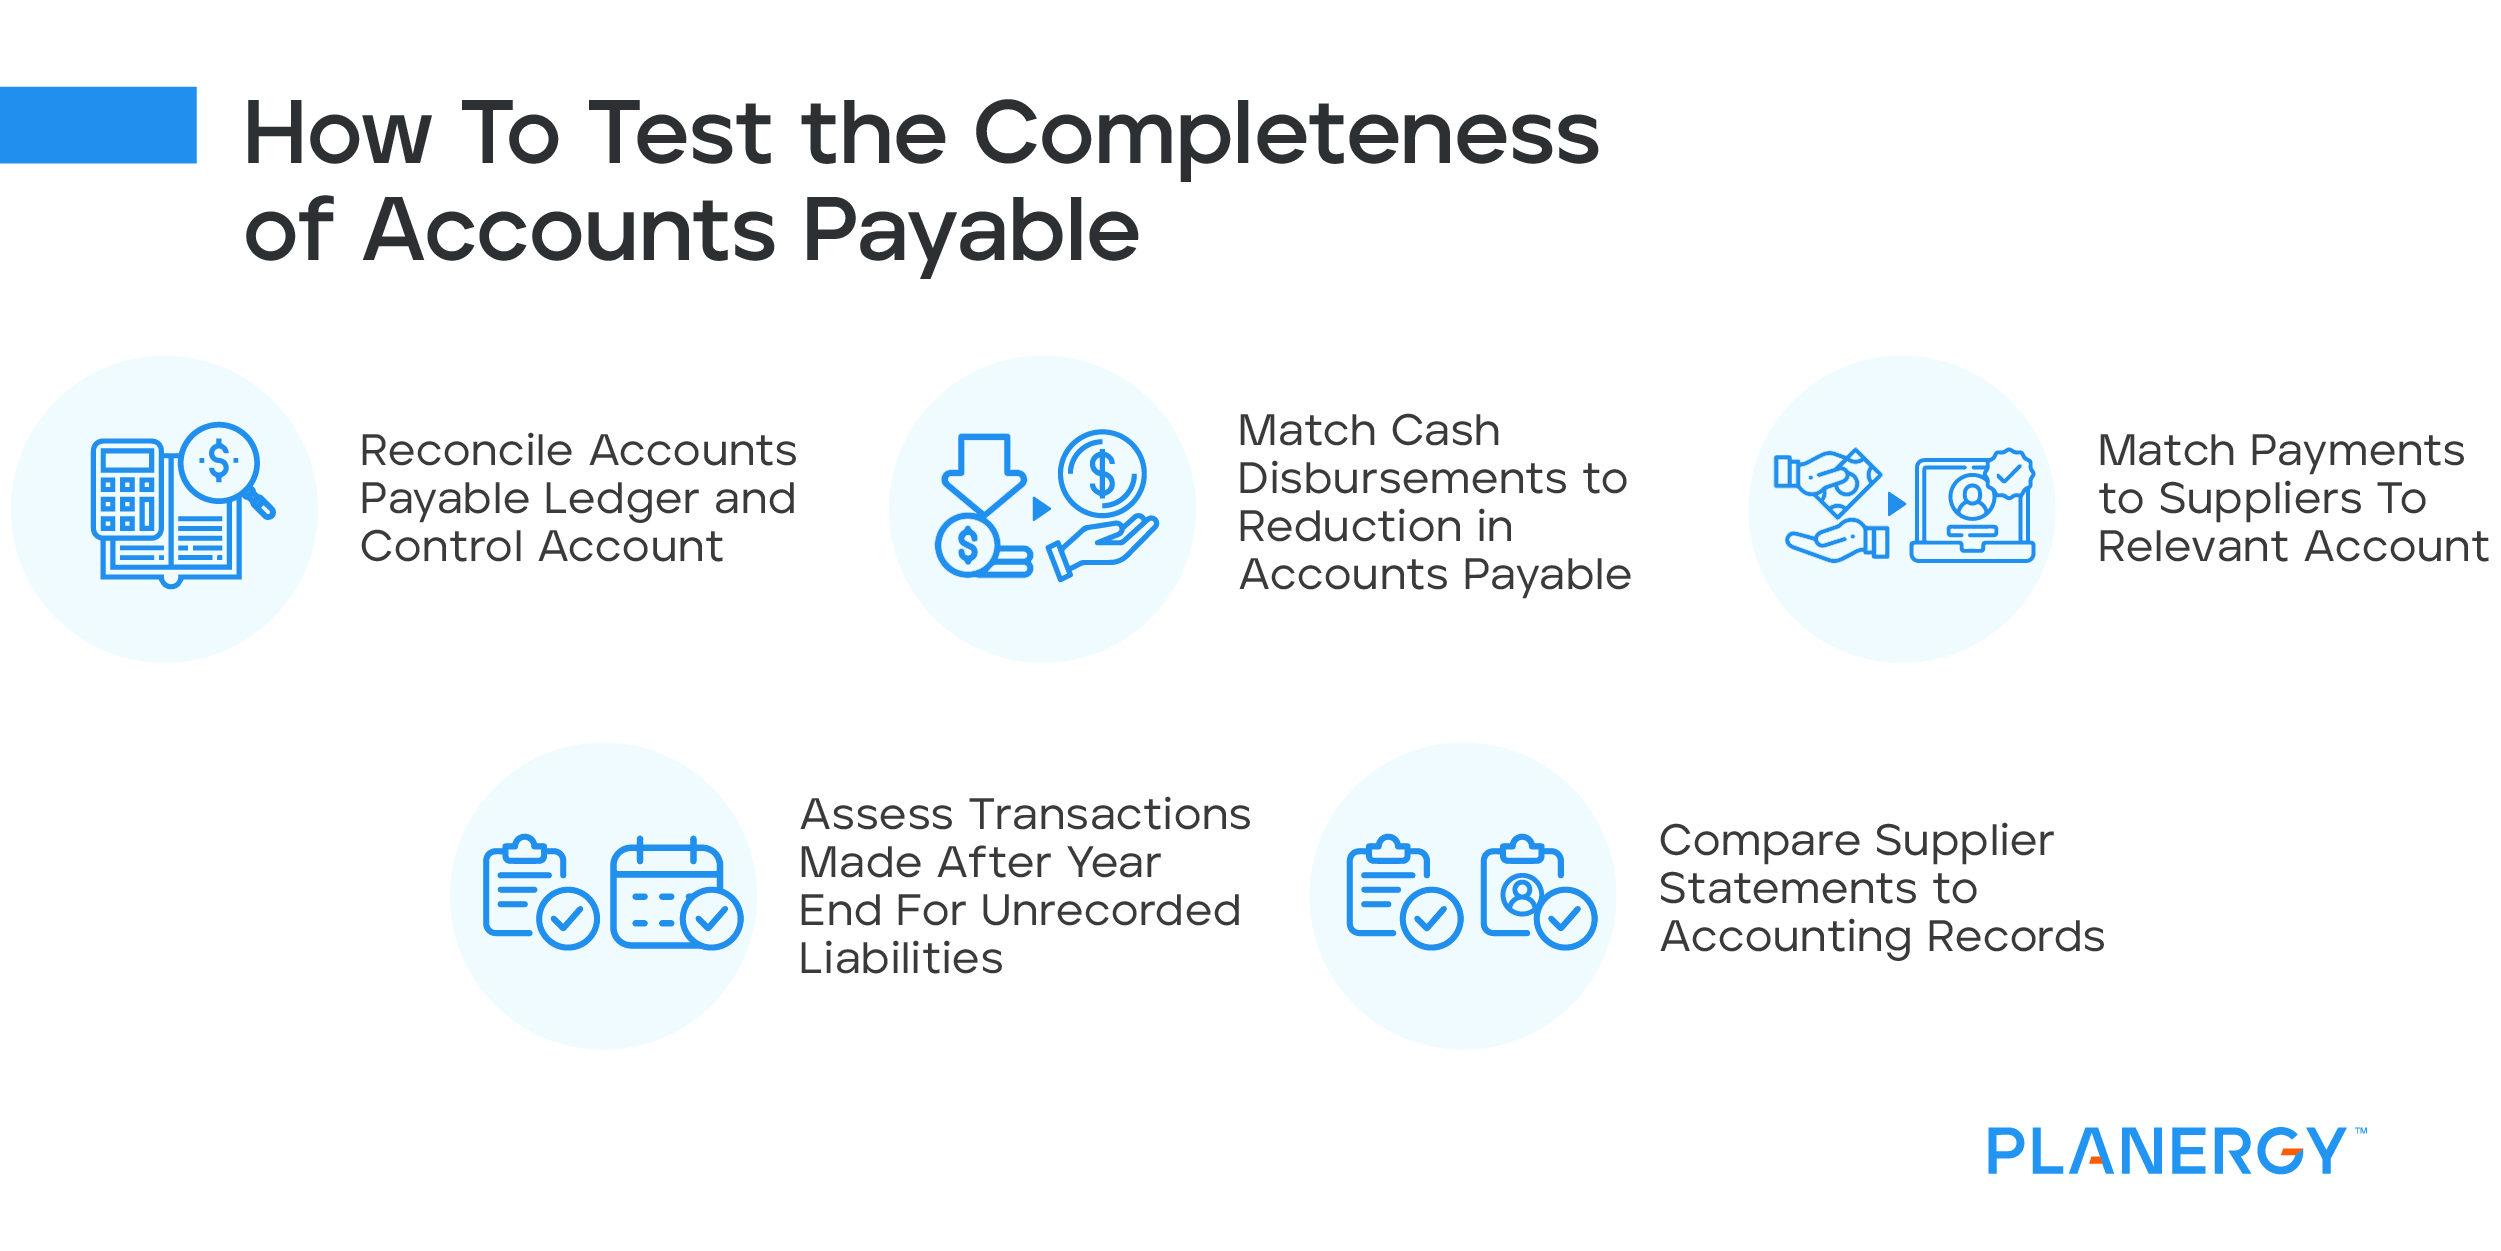 How to Test Completeness of Accounts Payable